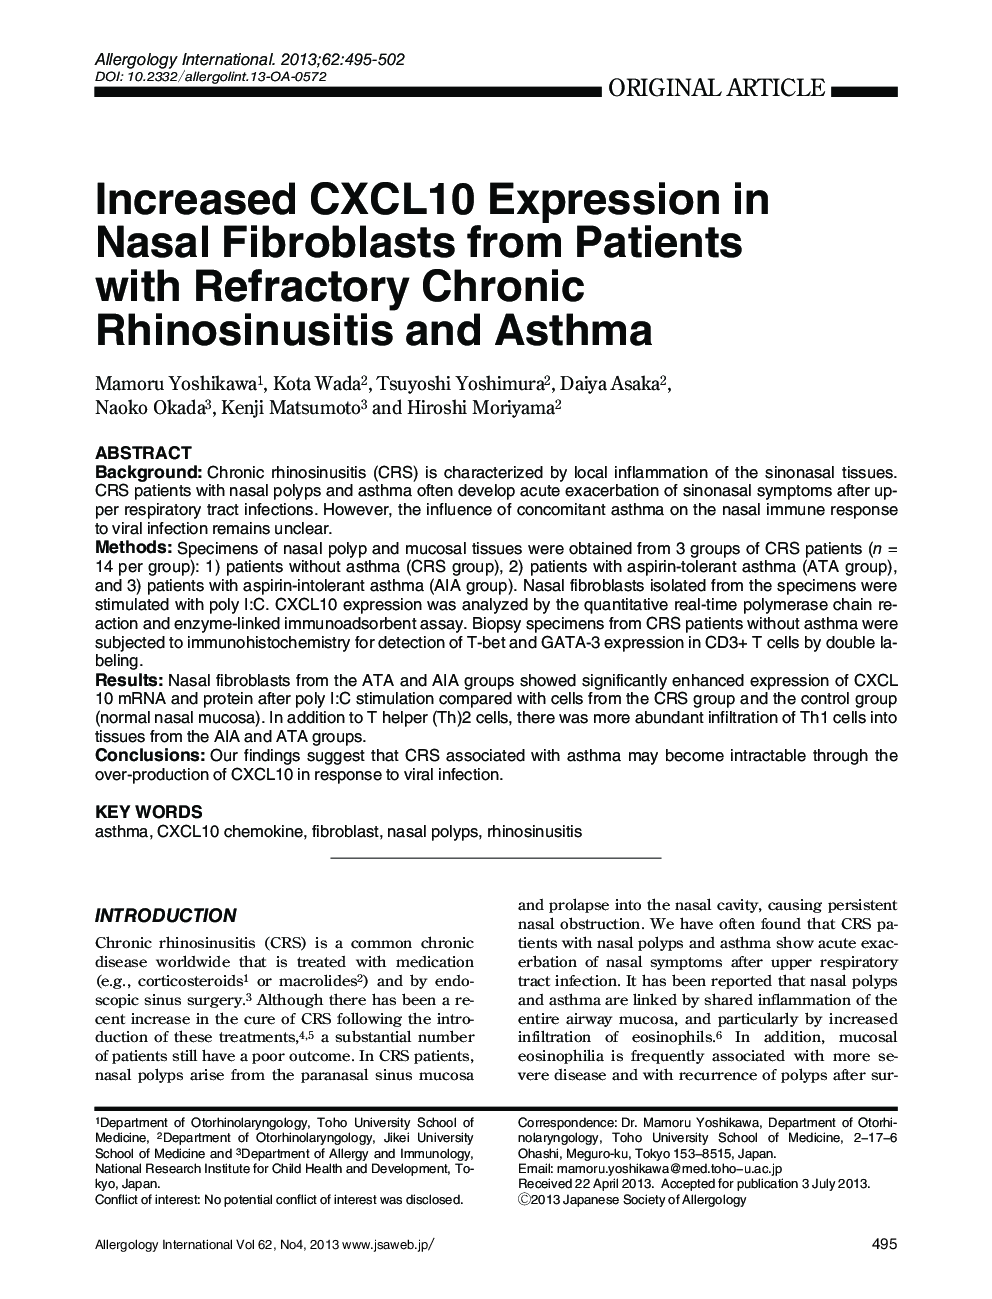 Increased CXCL10 Expression in Nasal Fibroblasts from Patients with Refractory Chronic Rhinosinusitis and Asthma